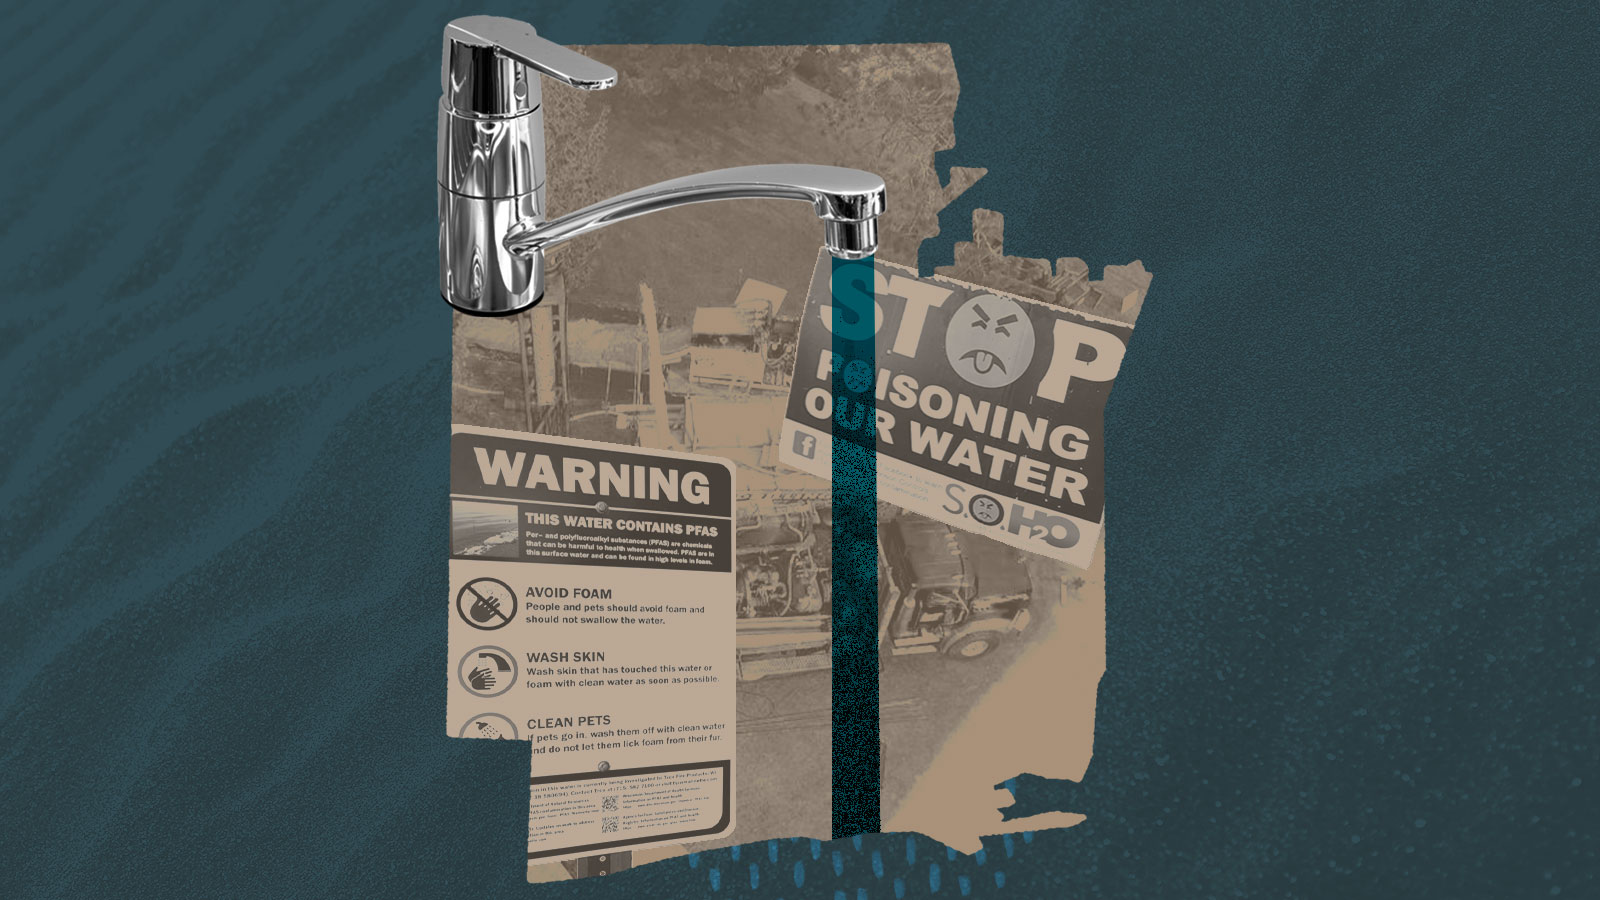 digital collage of water faucet, signs warning of and protesting PFAS